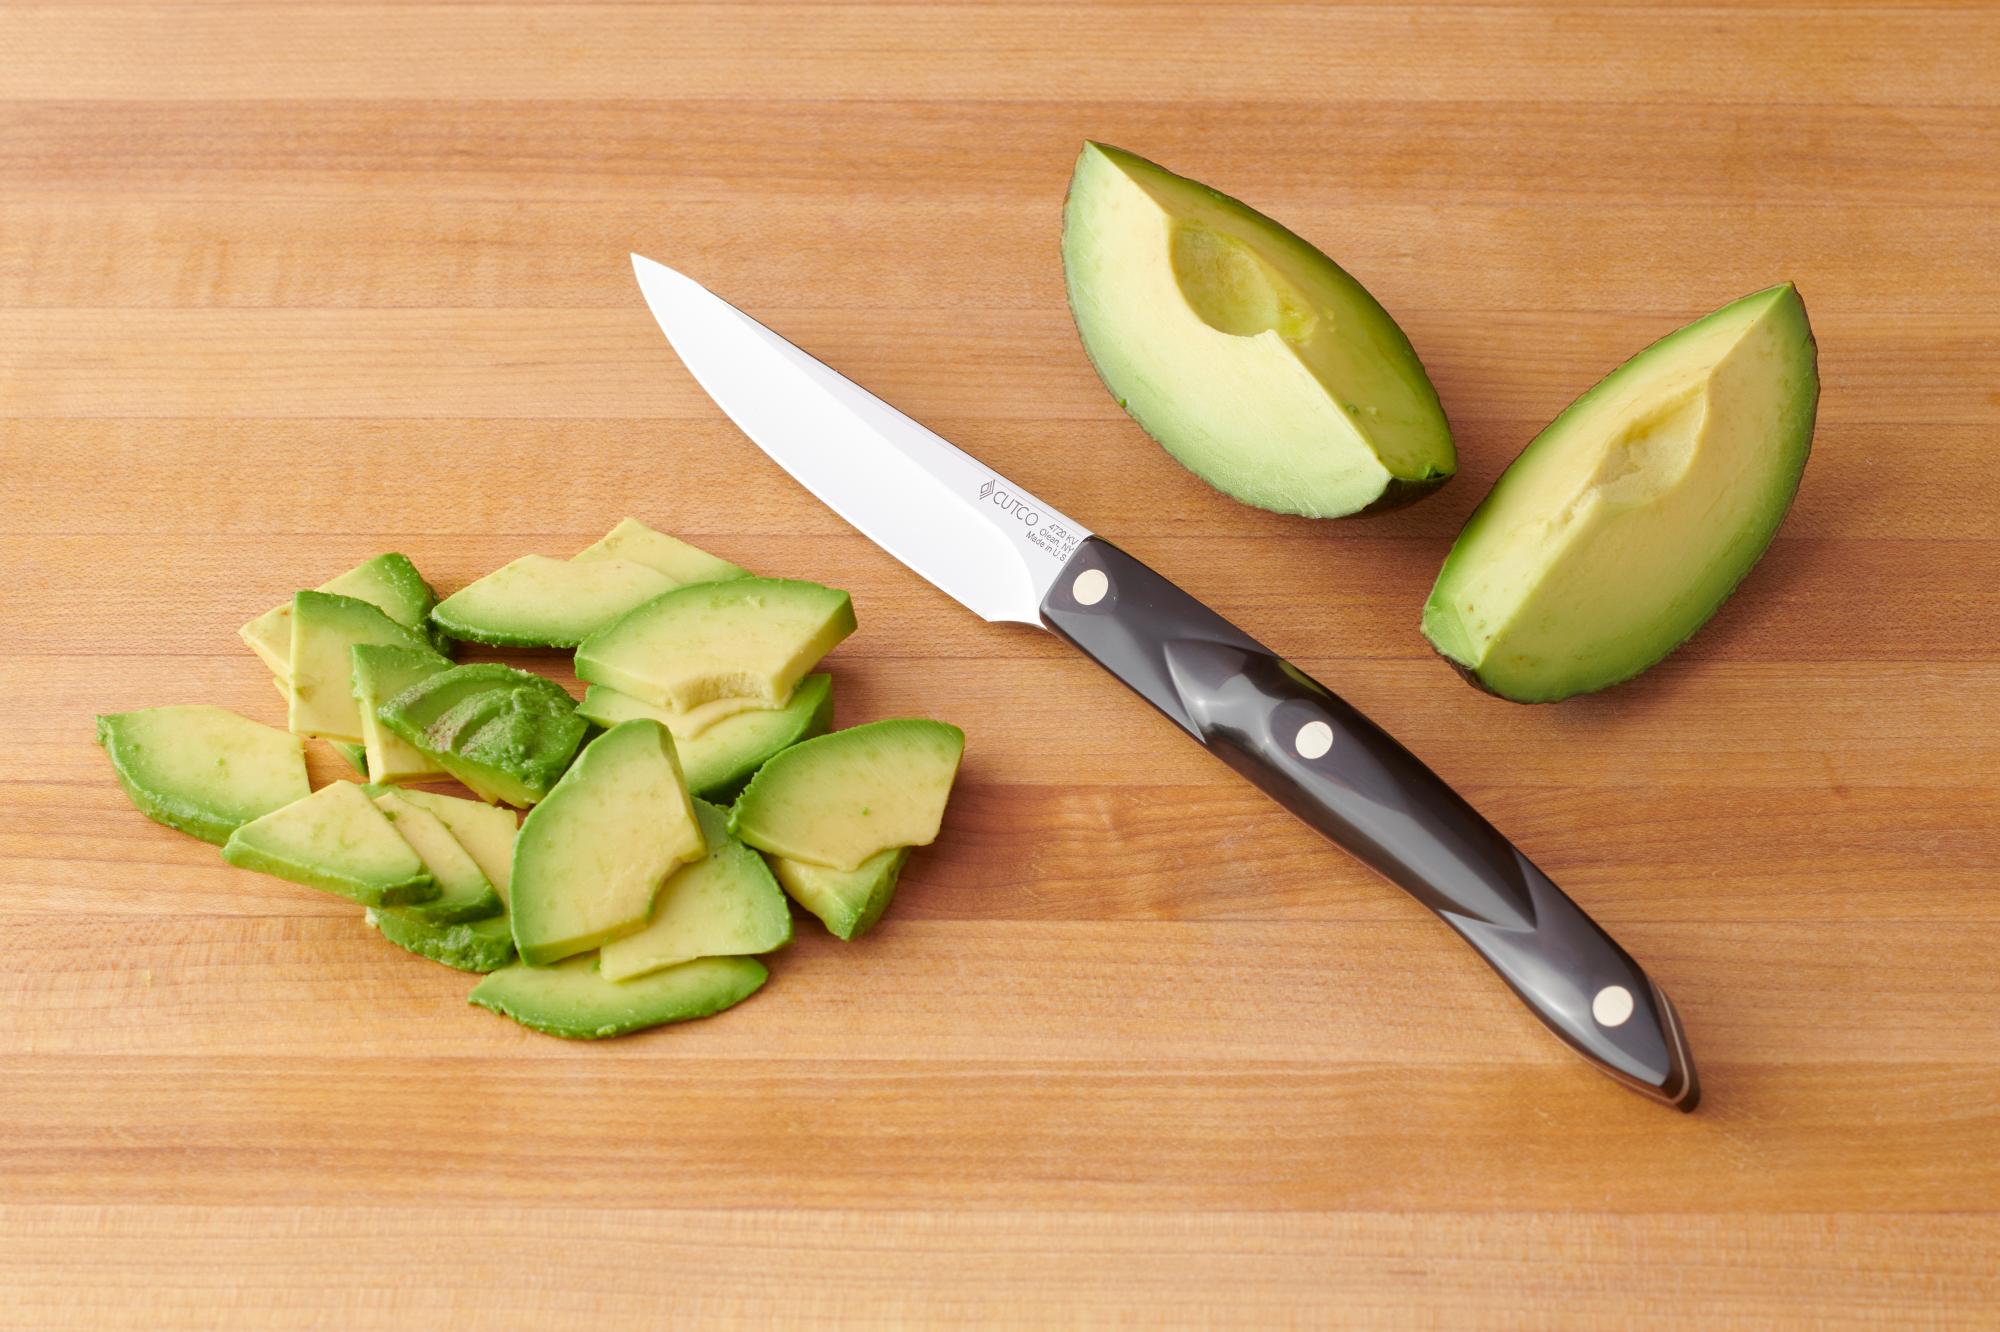 Avocado with a Gourmet Paring Knife.